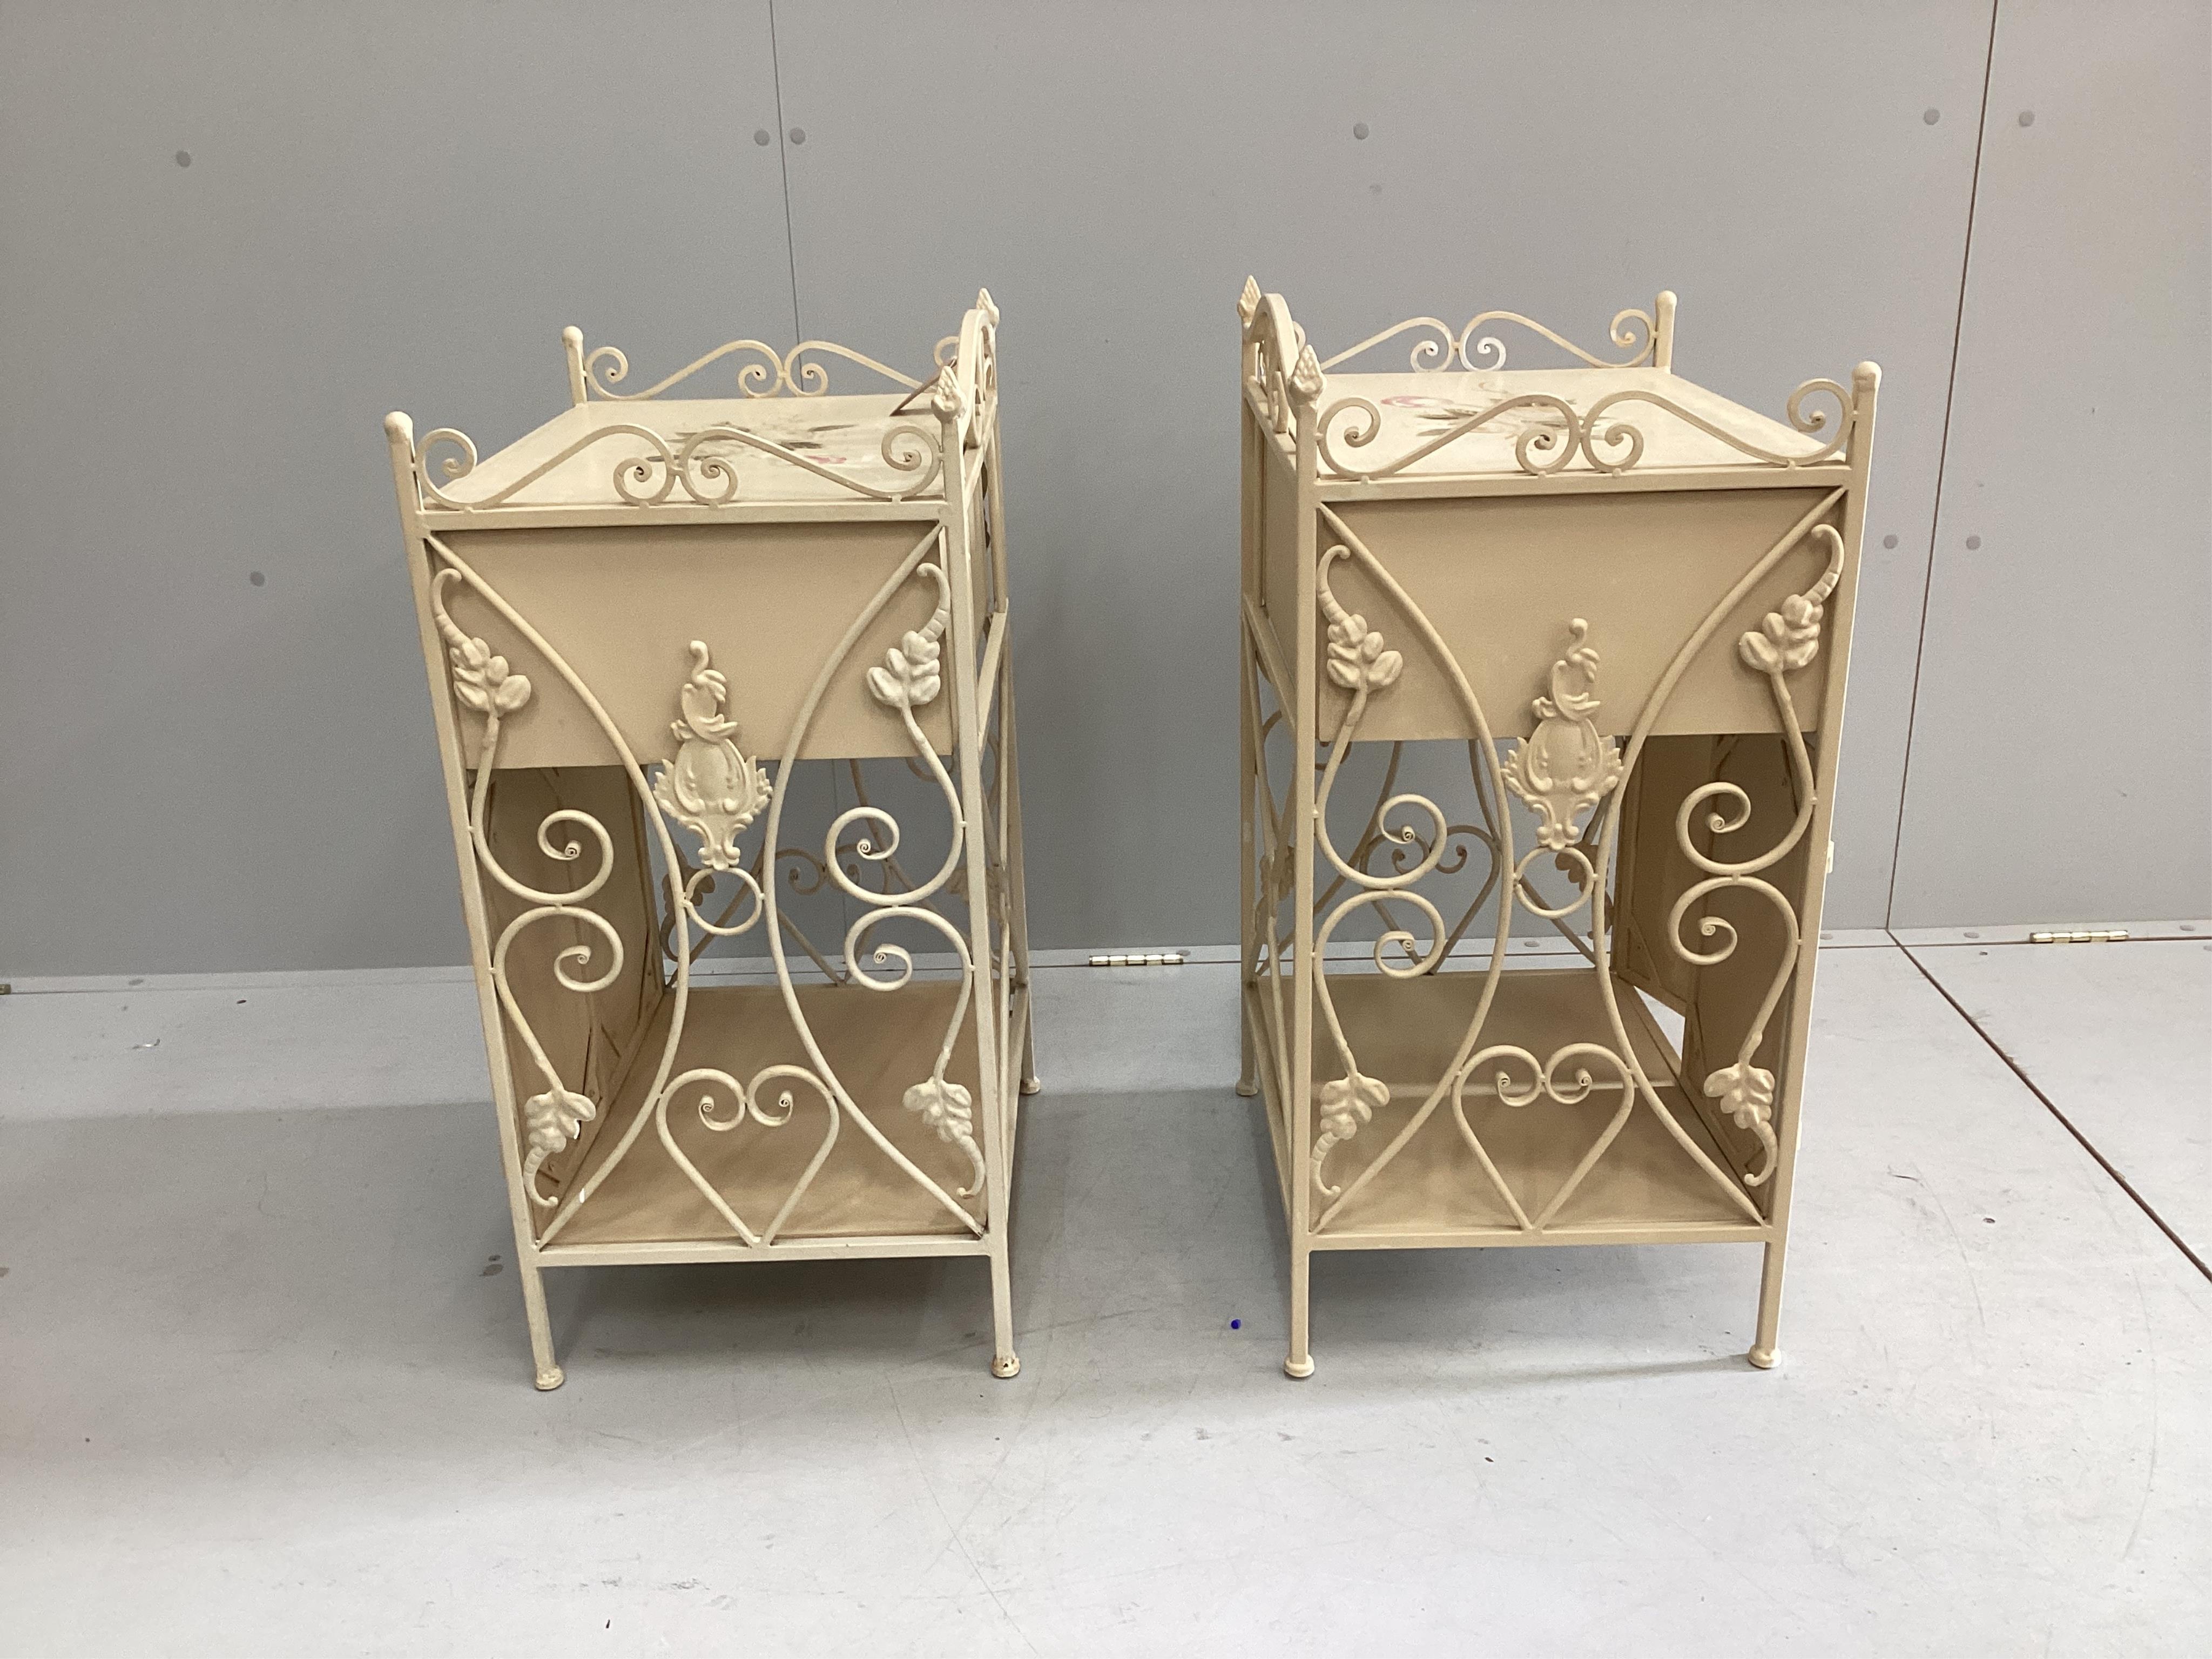 A pair of modern painted wrought iron bedside cabinets, width 48cm, depth 38cm, height 80cm. Condition - good